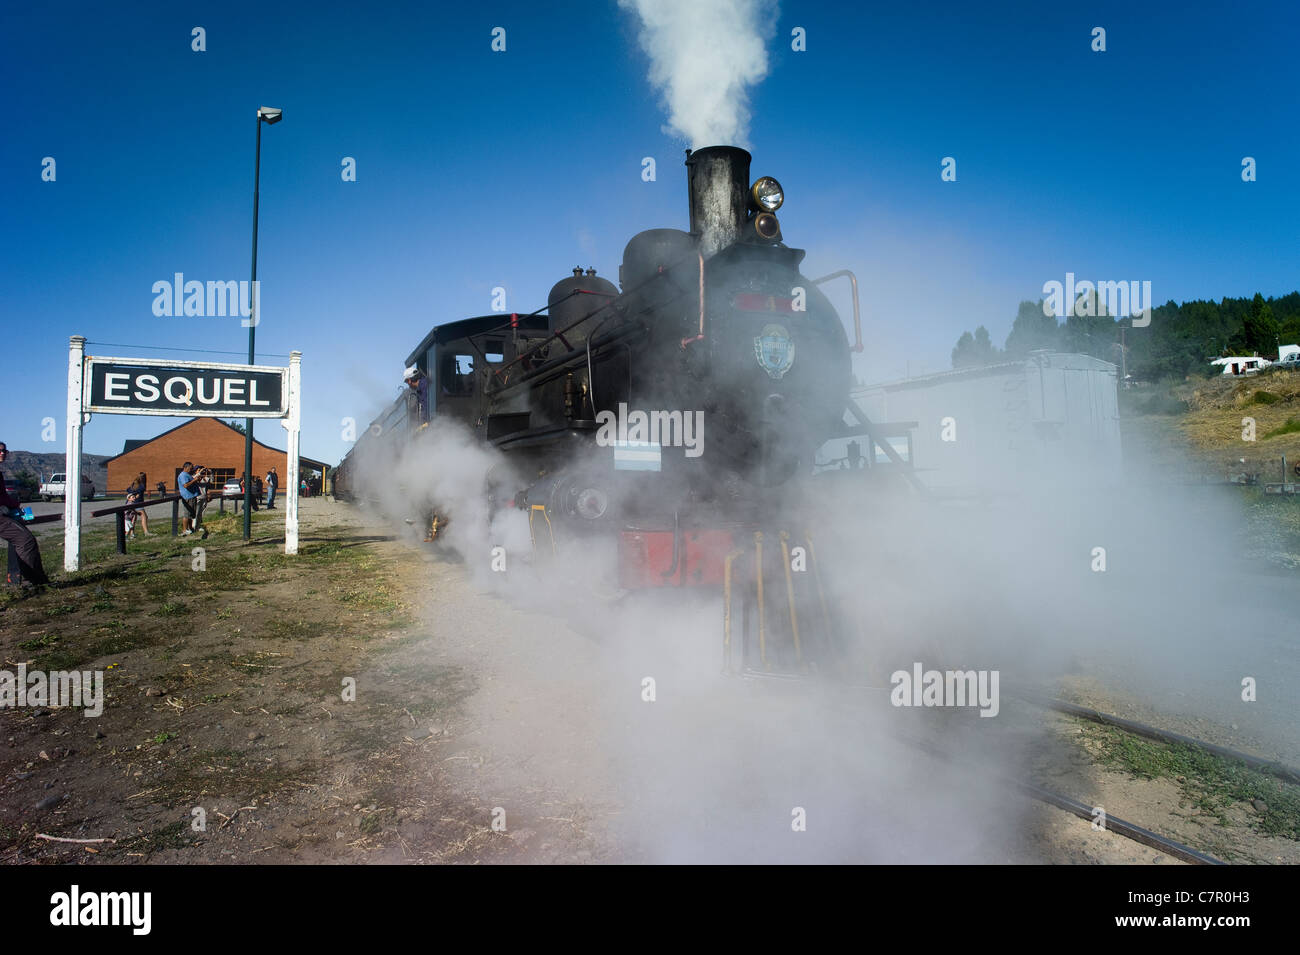 Locomotive of the Old Patagonia Express, Esquel, Chubut, Argentina Stock Photo